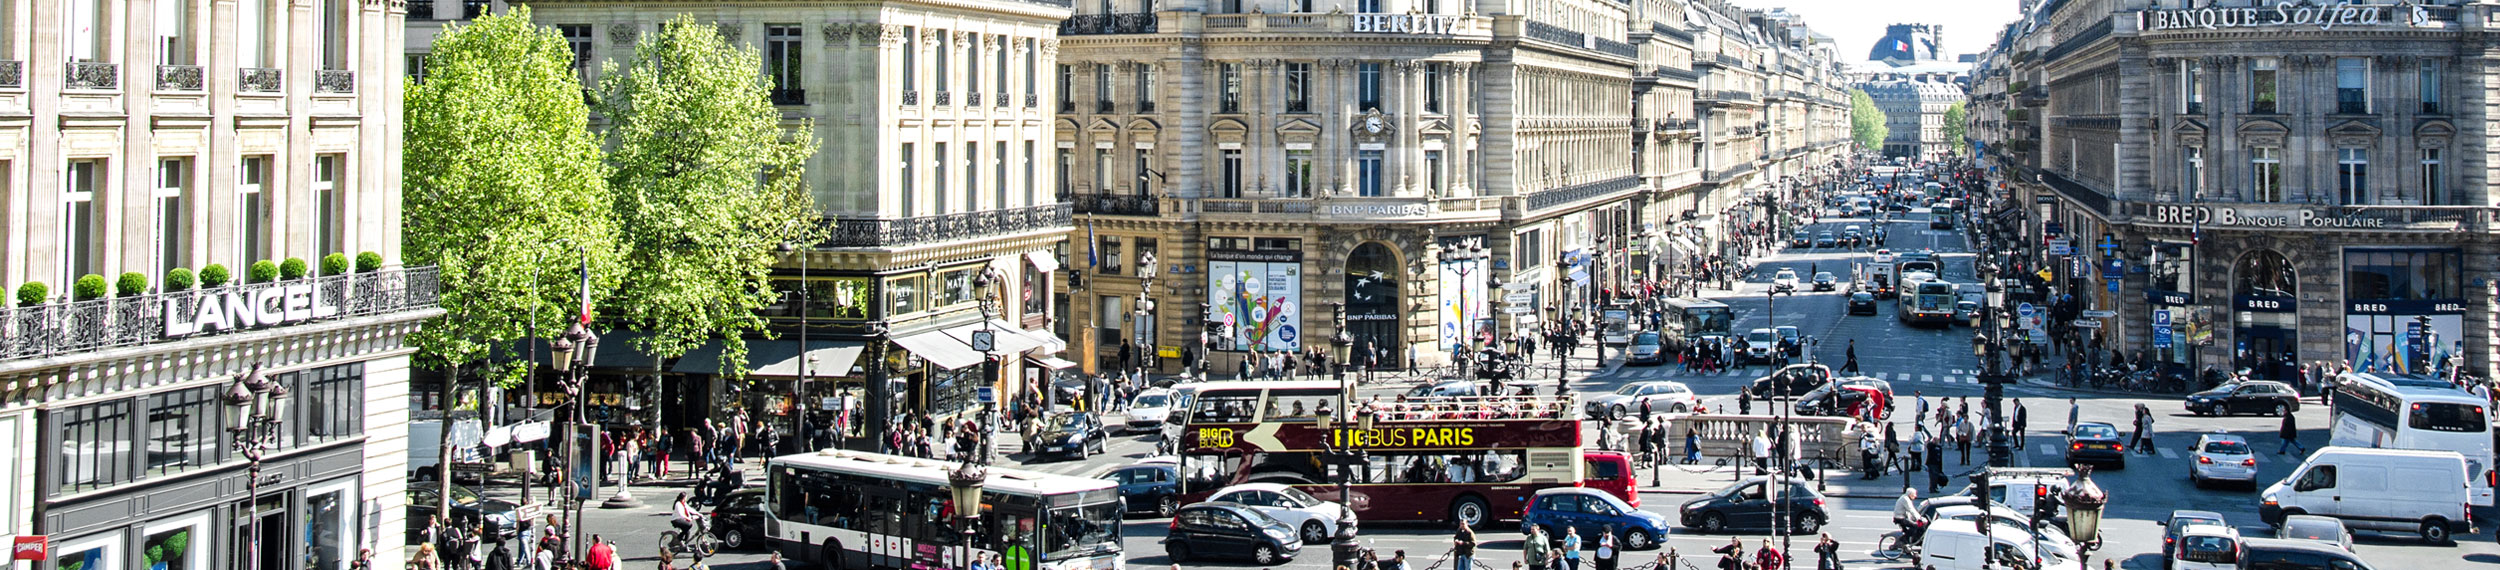 A shot of cars, buses and pedestrians in the streets of Paris, France. 